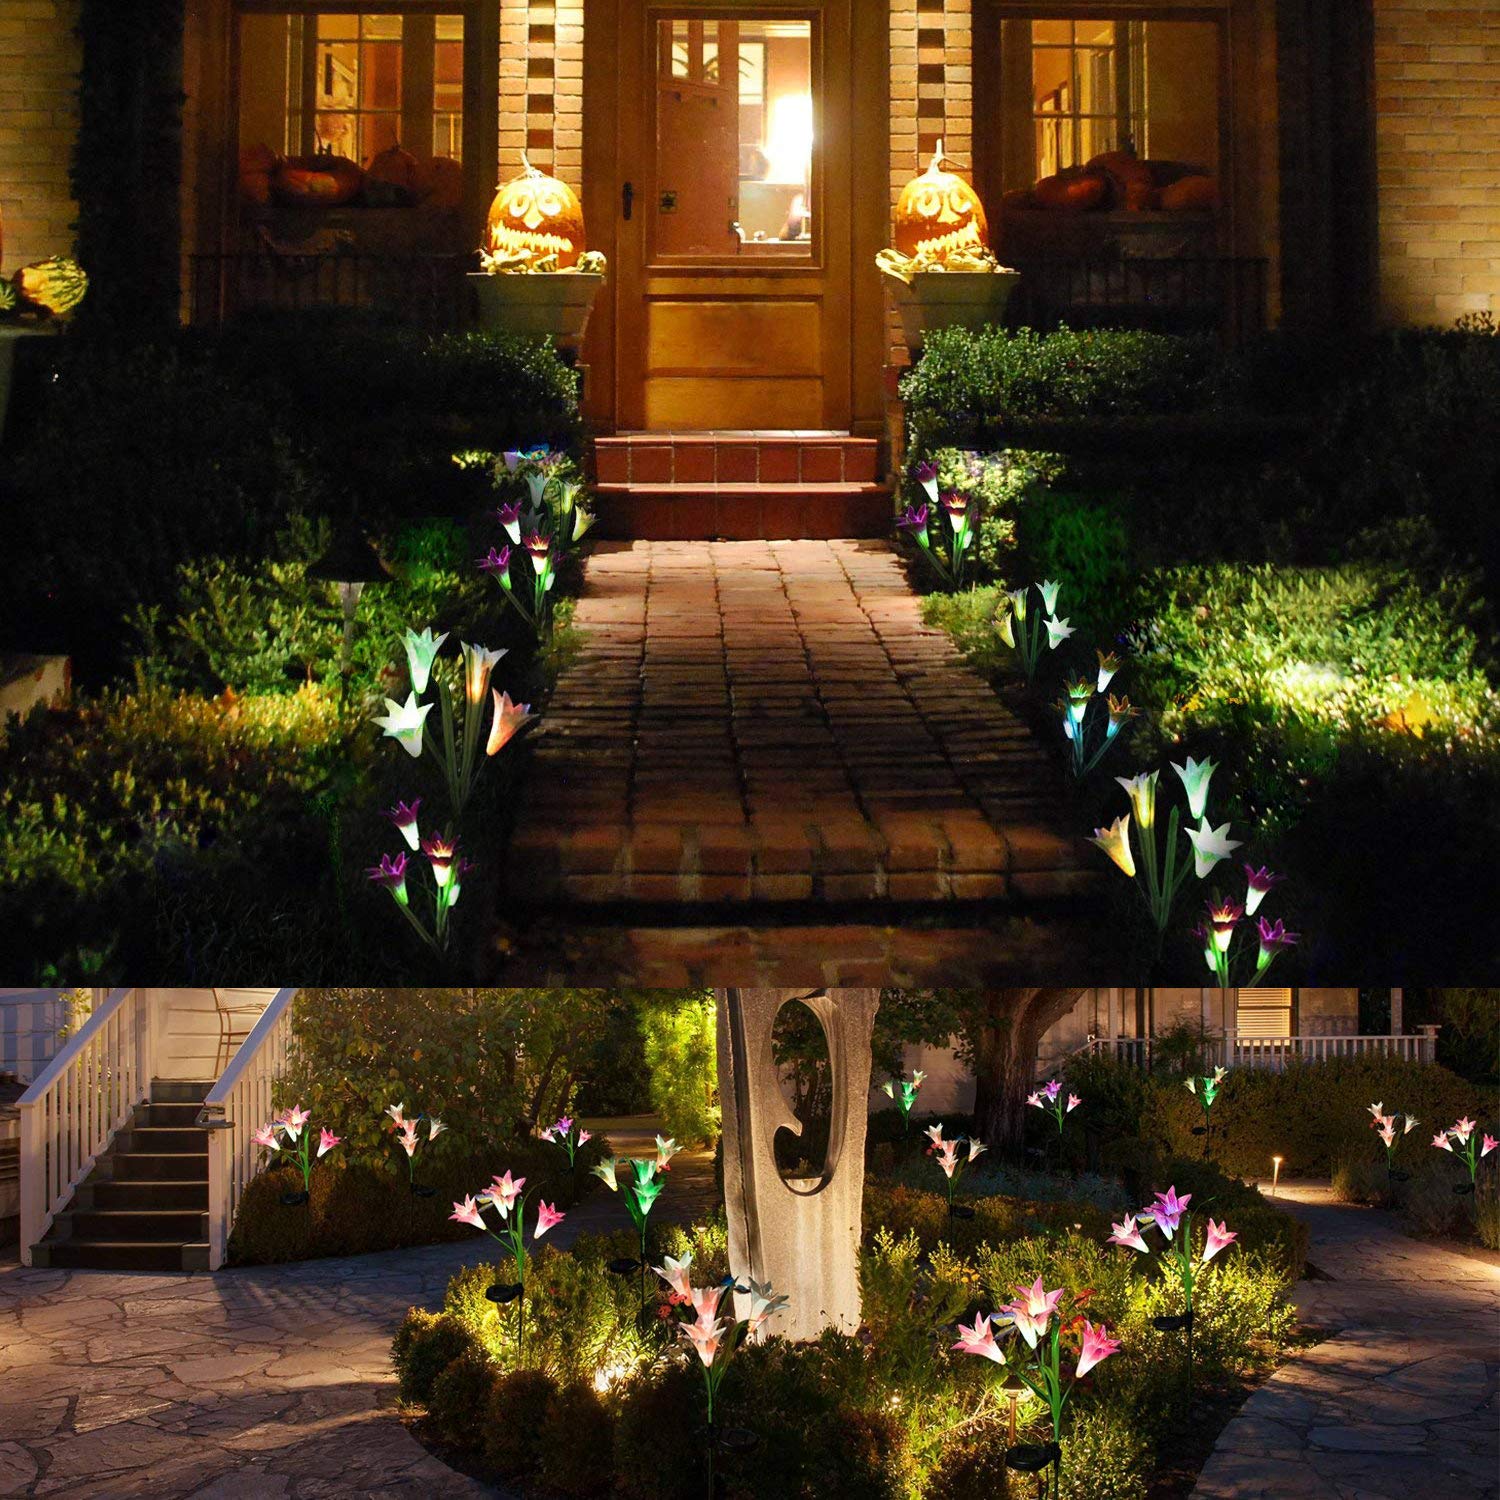 Outdoor Solar Garden Stake Lights, 2 Pack Solar Powered Lights with 8 Lily Flower, Multi-Color Changing LED Solar Landscape Lighting Light for Garden, Patio (Outdoor Solar Garden Stake Lights-2) - image 3 of 5